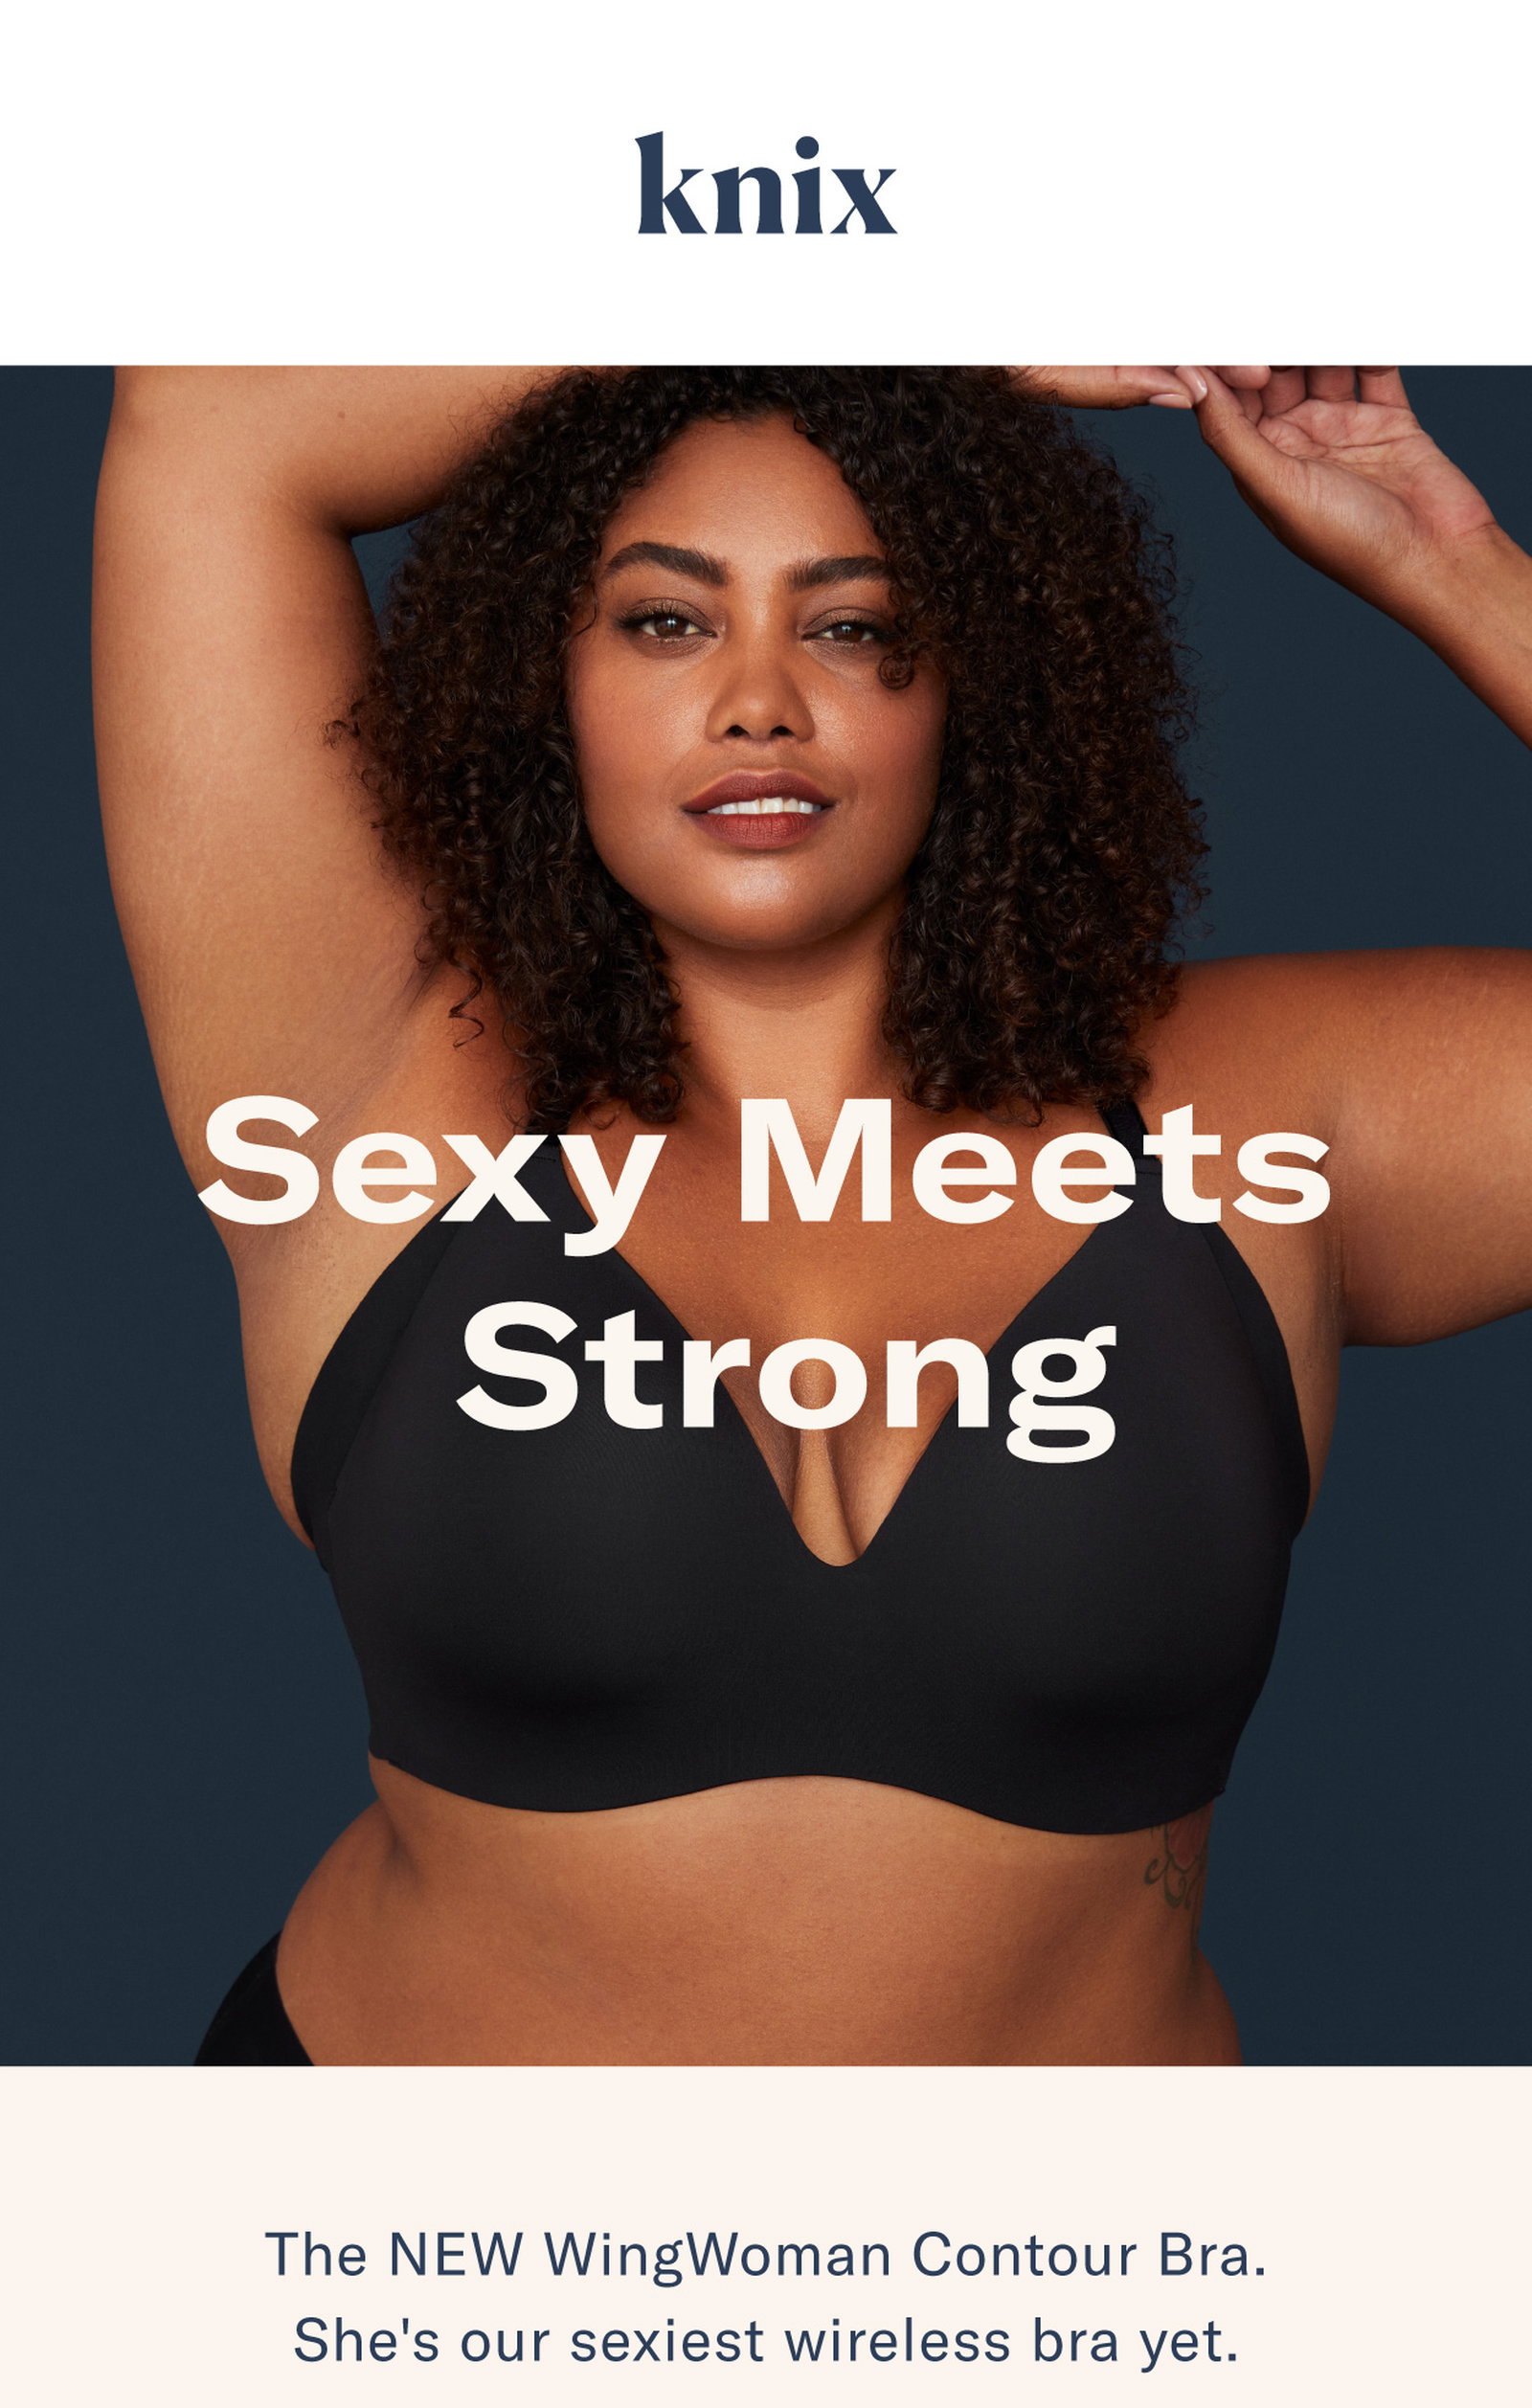 Say goodbye to discomfort, and hello to our Wireless Bra! 👋 Our